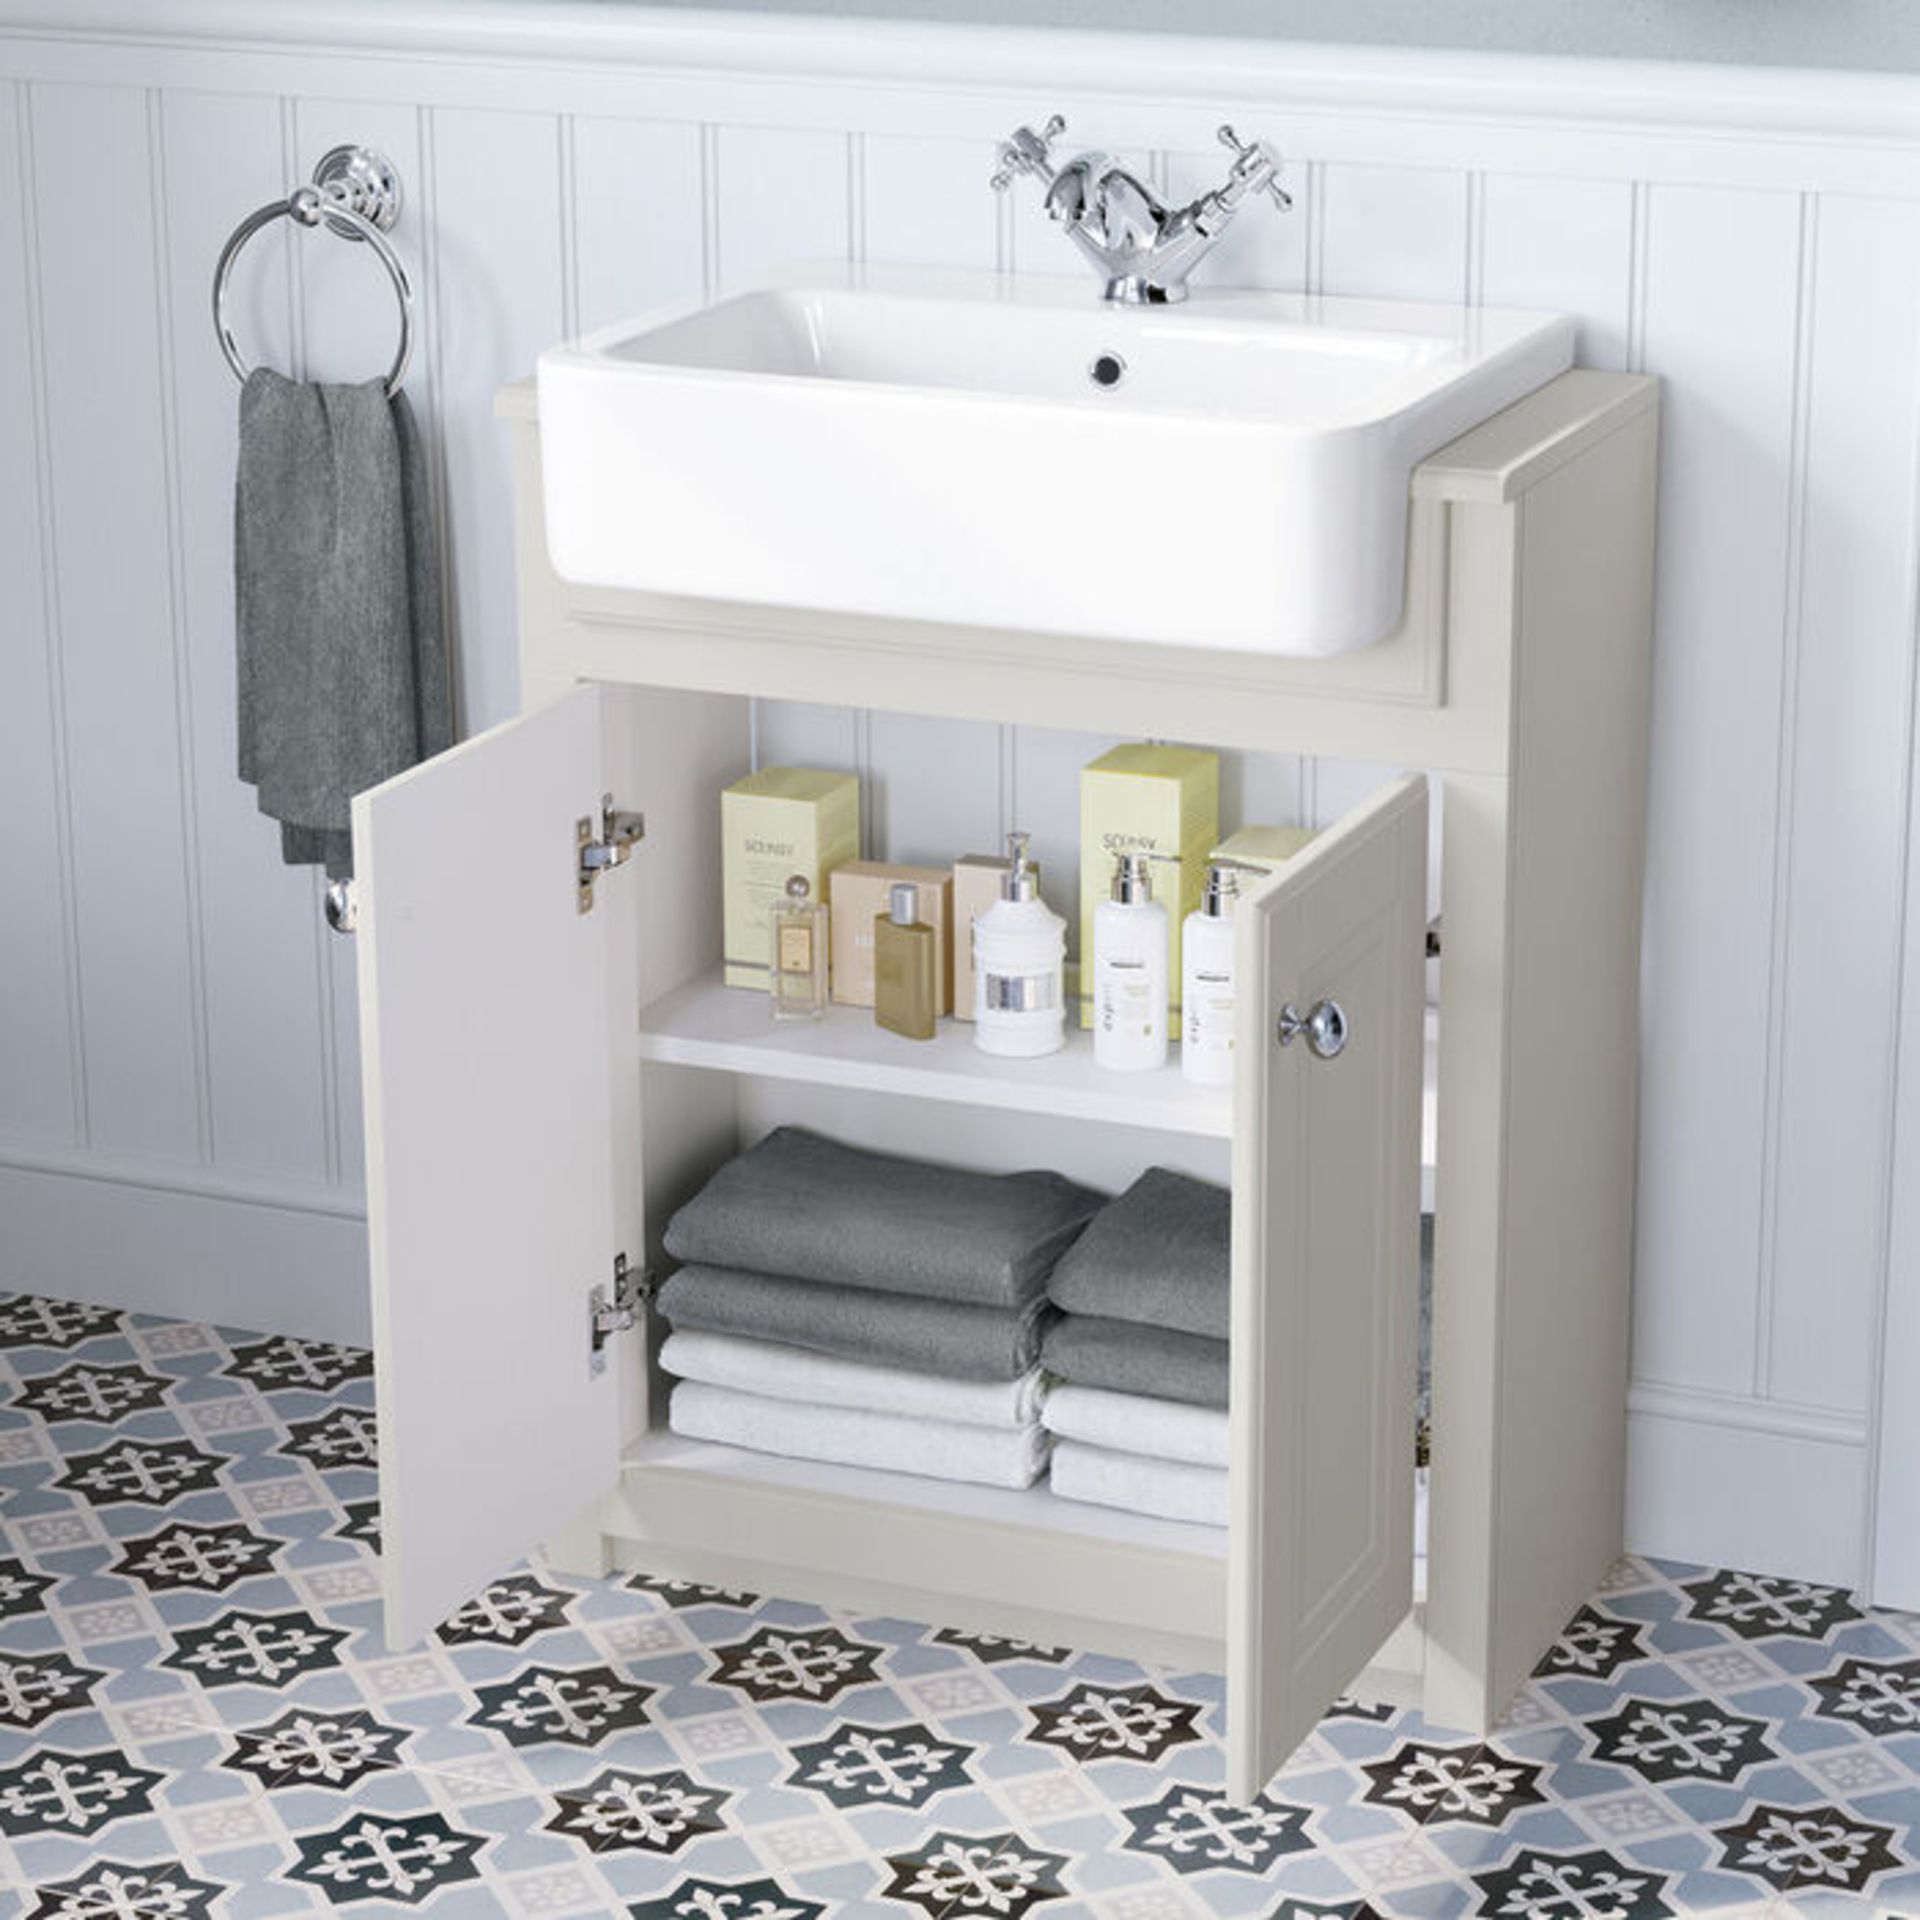 NEW & BOXED 667mm Cambridge Clotted Cream FloorStanding Sink Vanity Unit. RRP £749.99.Comes... - Image 2 of 3